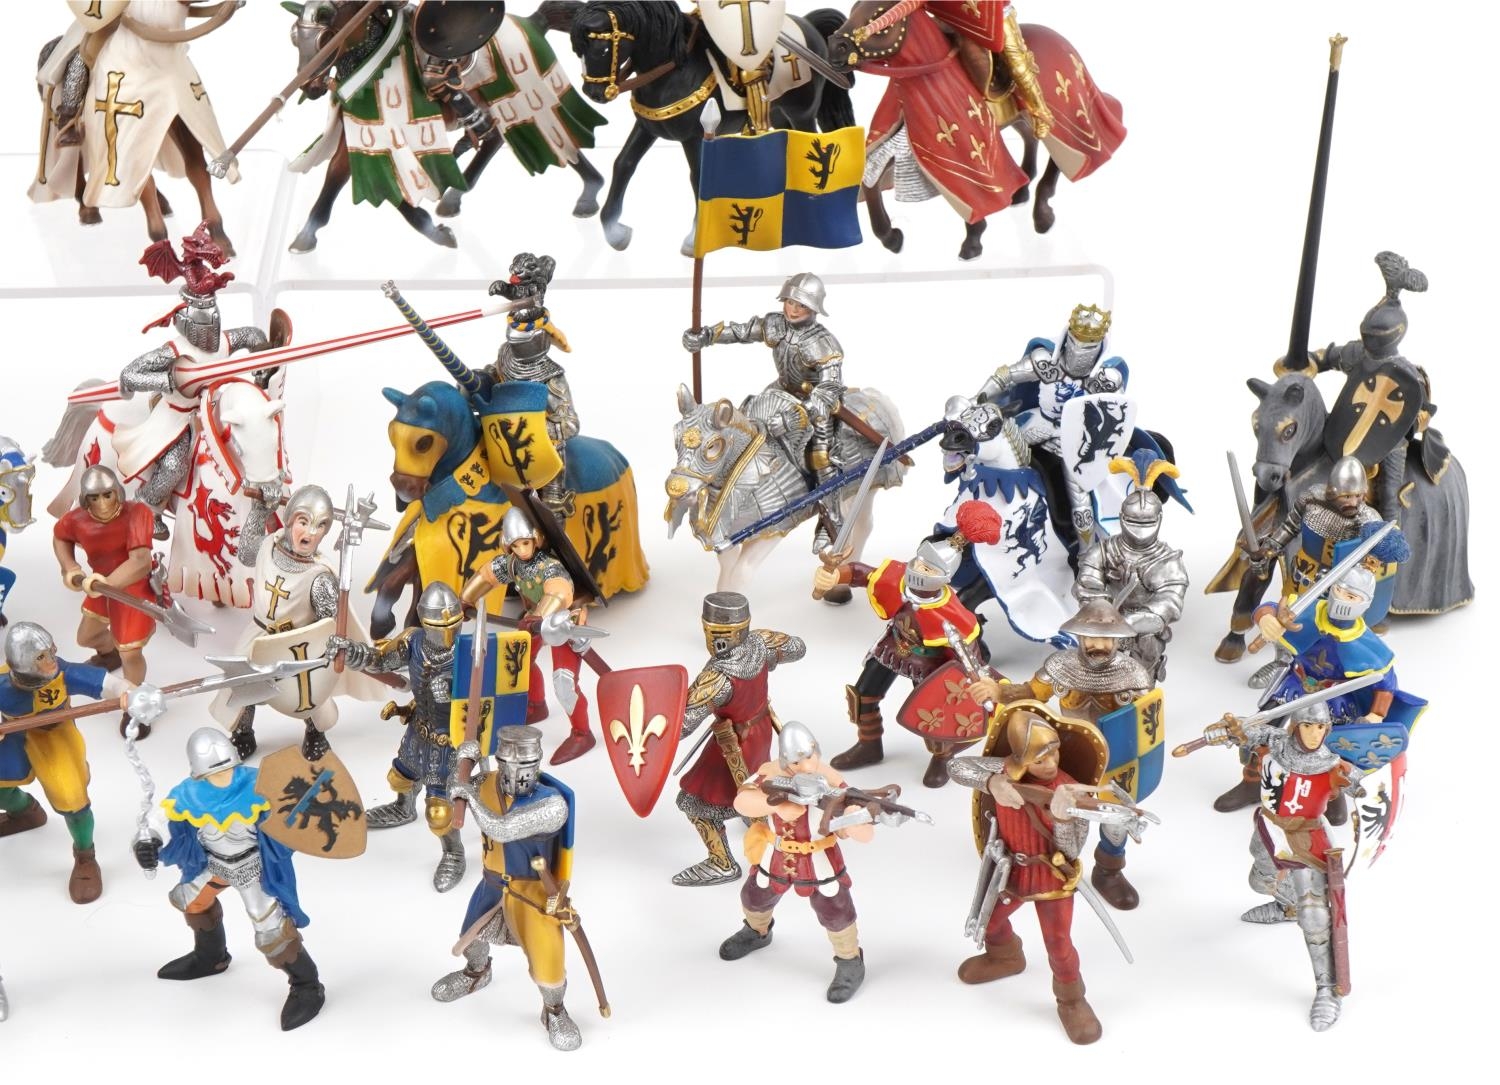 Collection of Schleich German model jousting knights on horseback, each approximately 20cm in length - Image 4 of 4